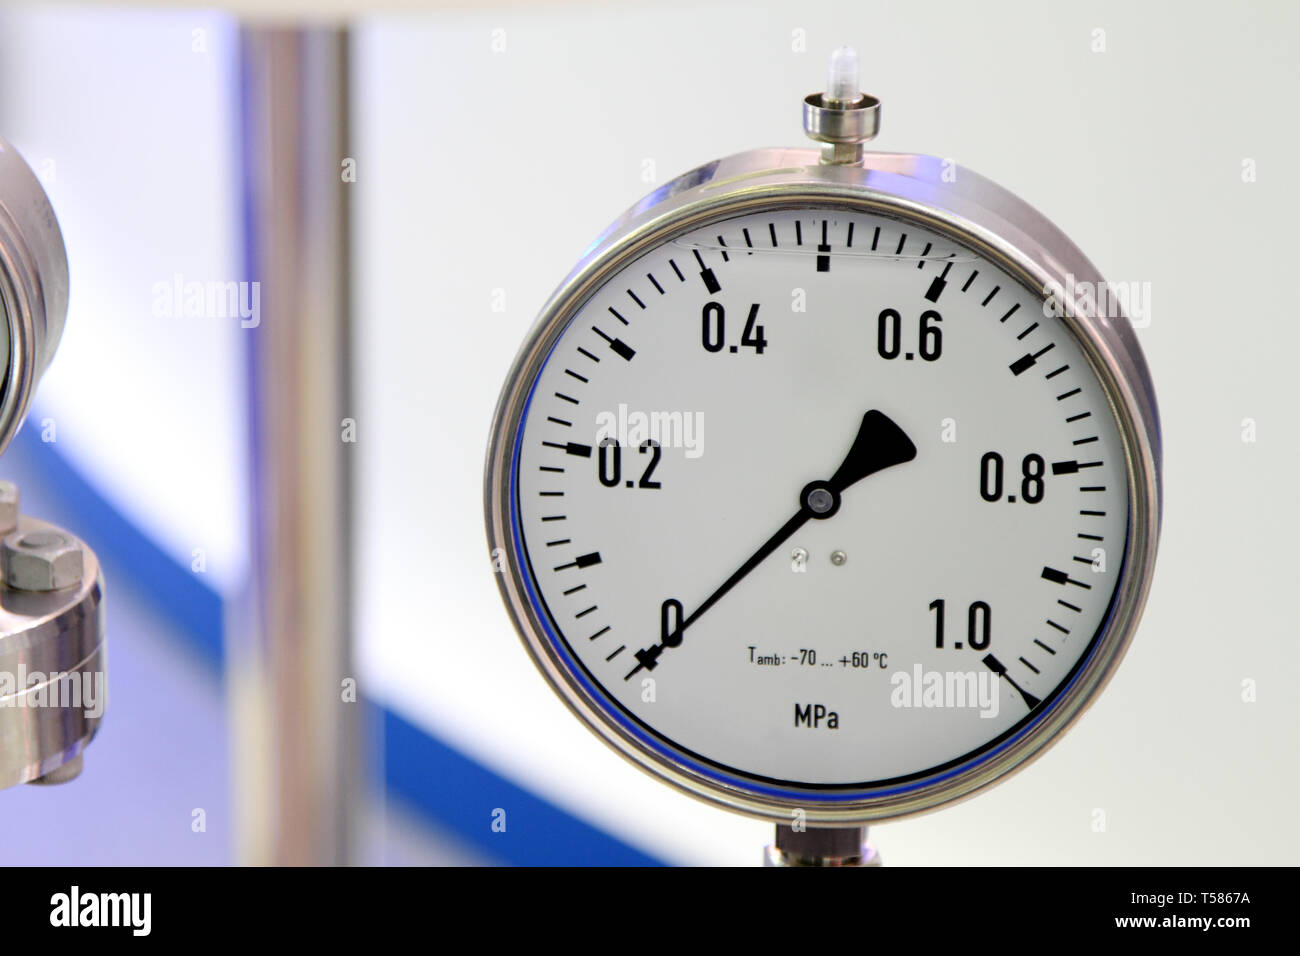 Pressure gauge - a device for measuring the pressure of fluid in the pipeline. Stock Photo